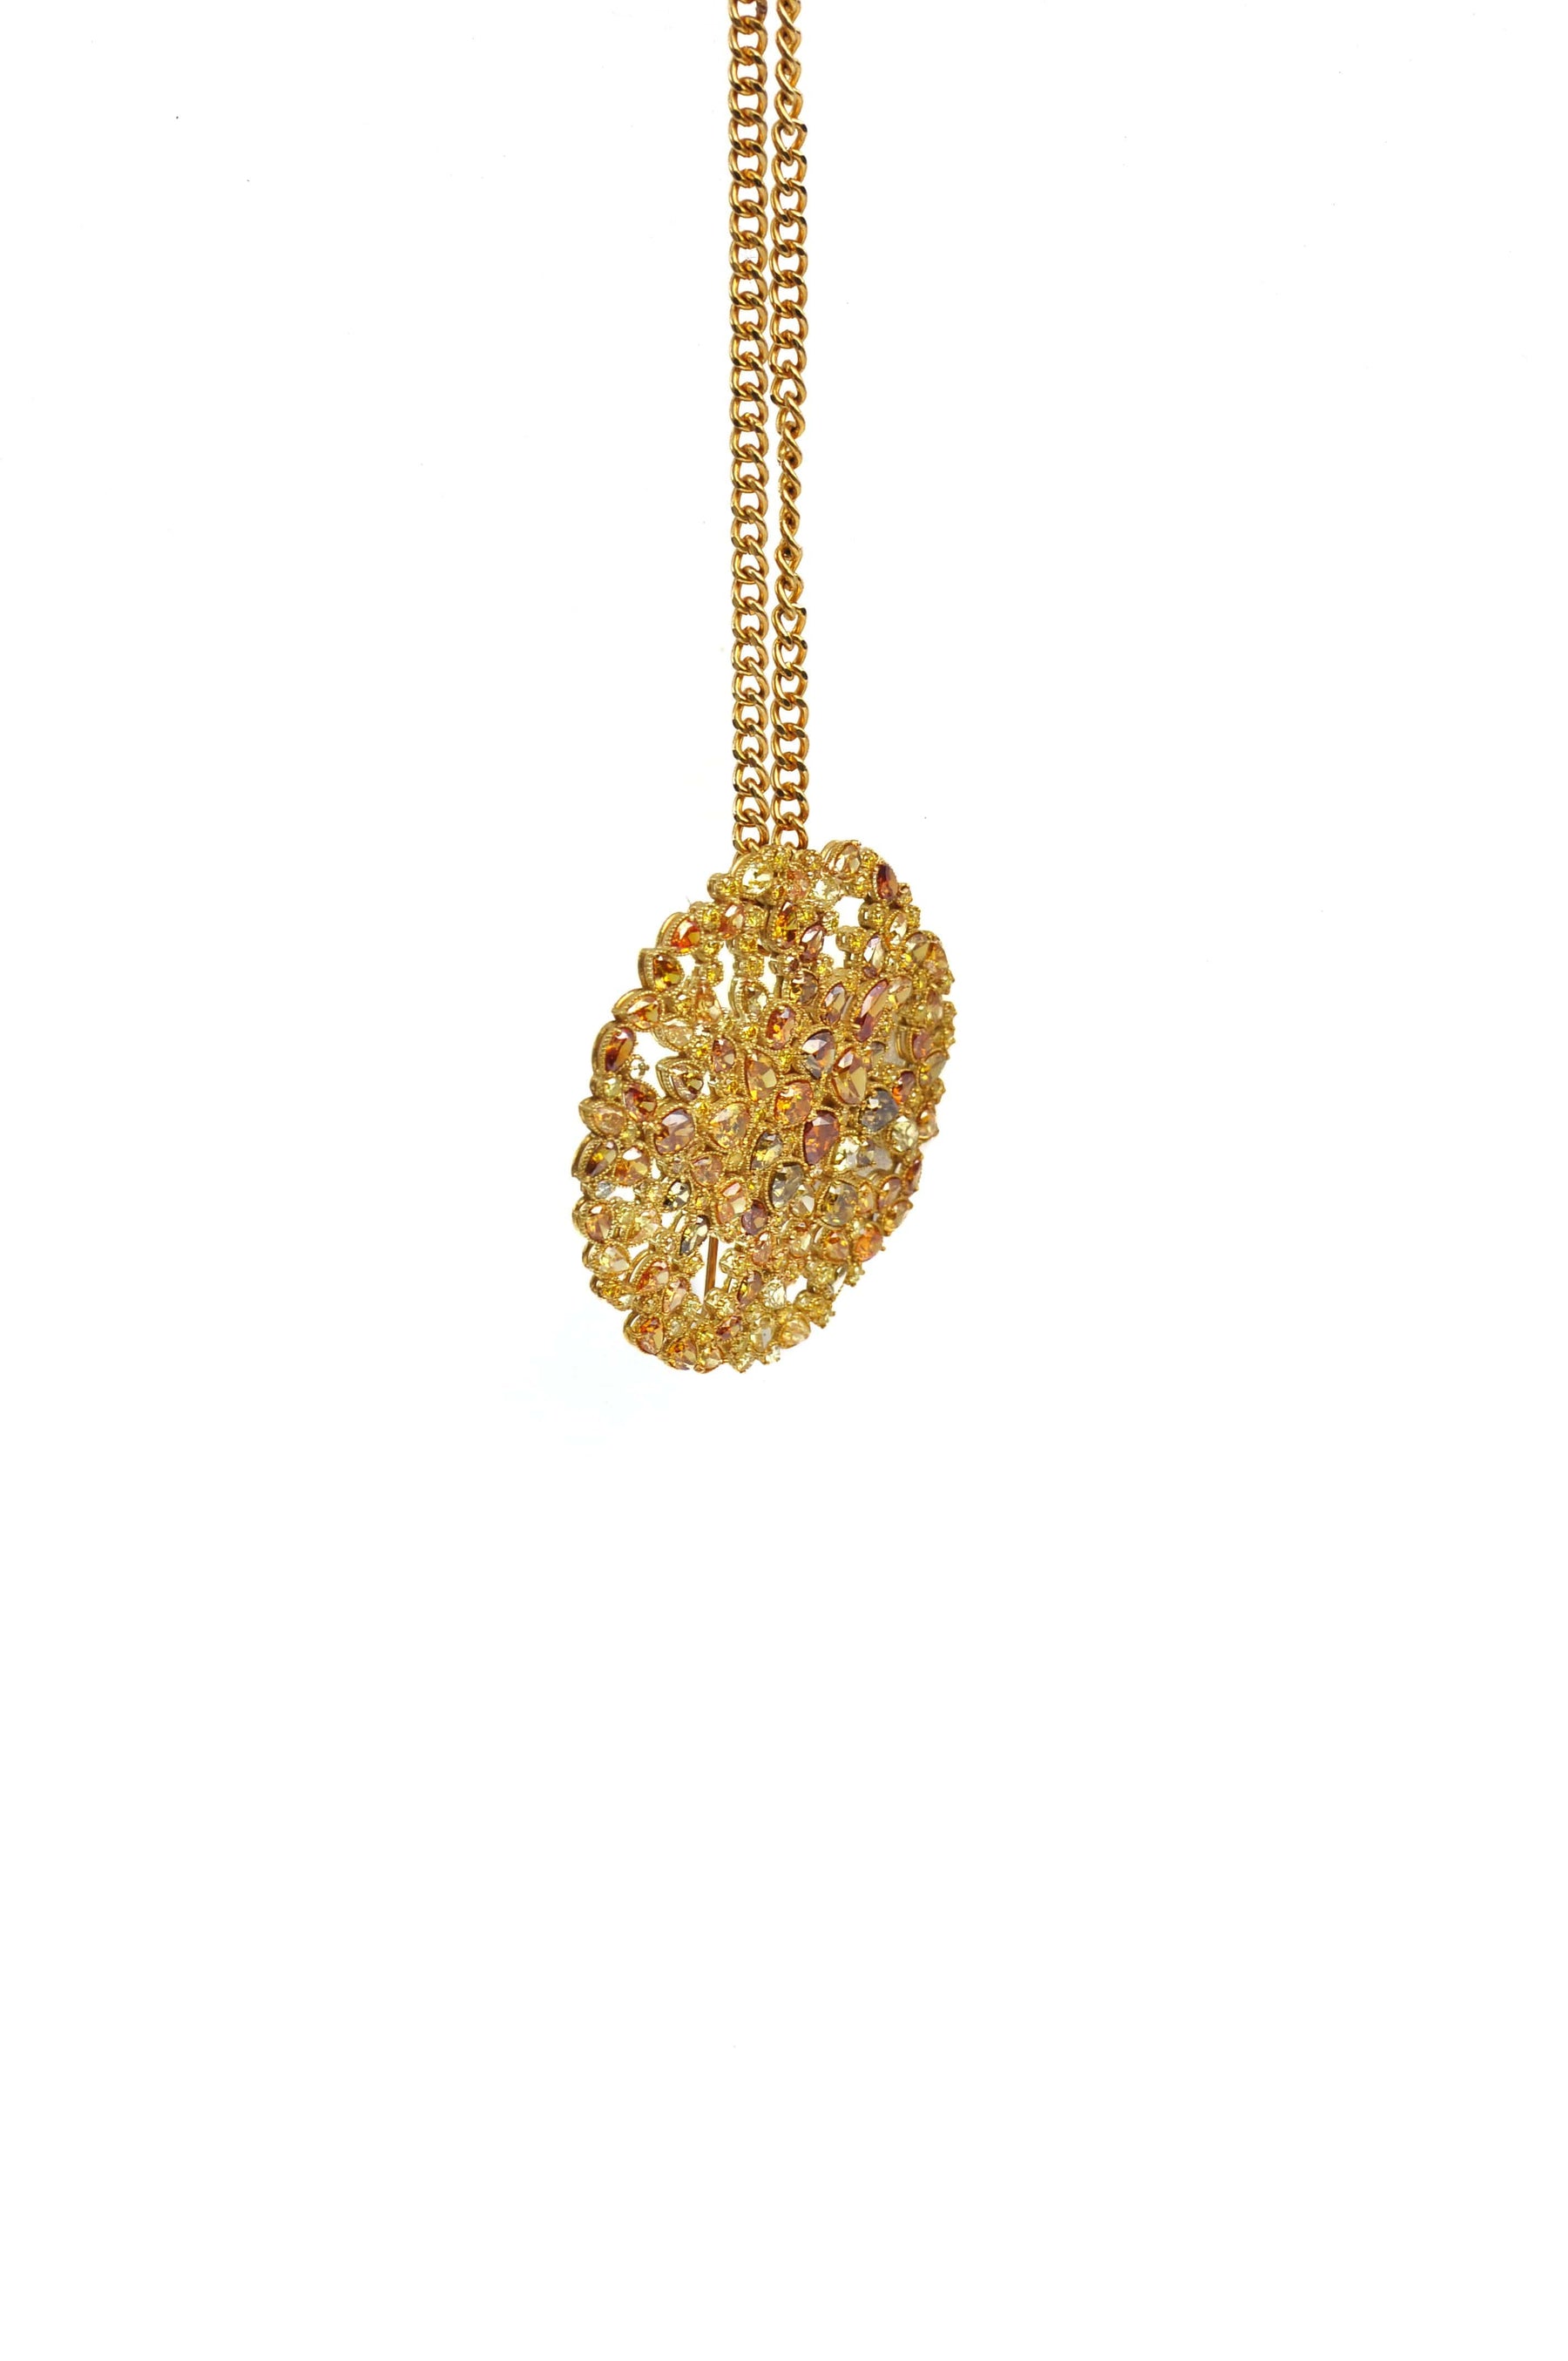 13.81 Carats Fancy Diamond Brooch and Necklace - Chris Aire Brooch - Chris Aire Fine Jewelry & Timepieces